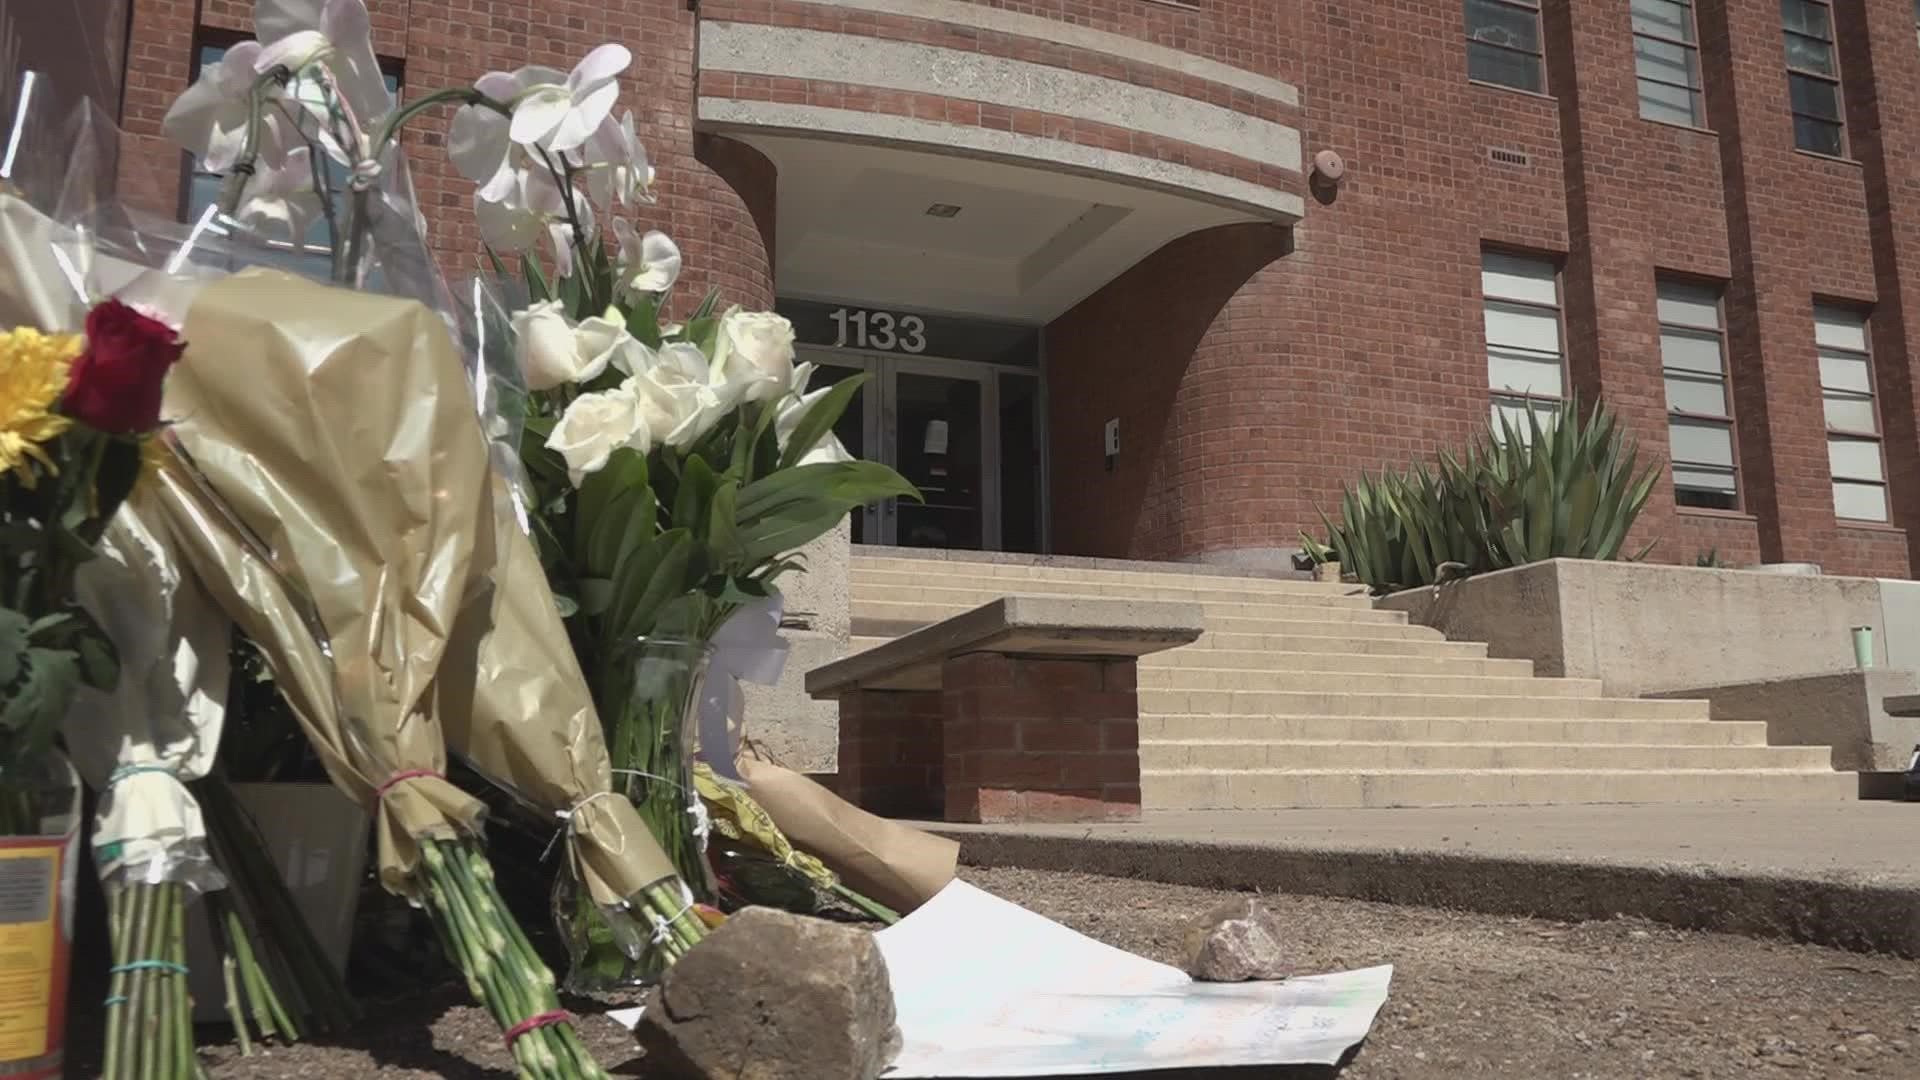 The University of Arizona community is heartbroken after a professor was gunned down on campus Wednesday.